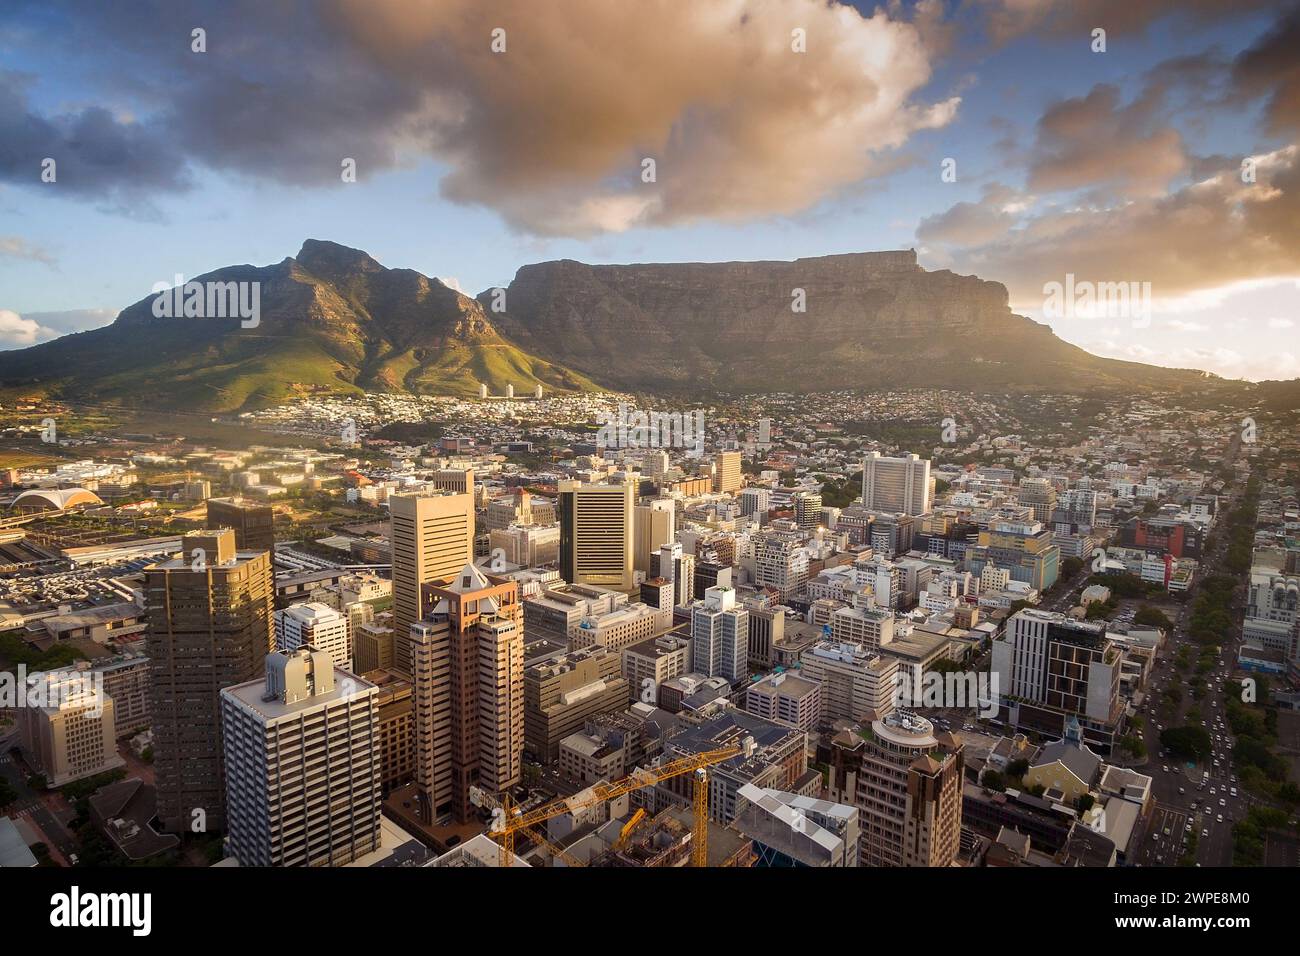 An aerial view of Cape Town central business district in late afternoon as the sun is setting, showing Table Mountain. Stock Photo